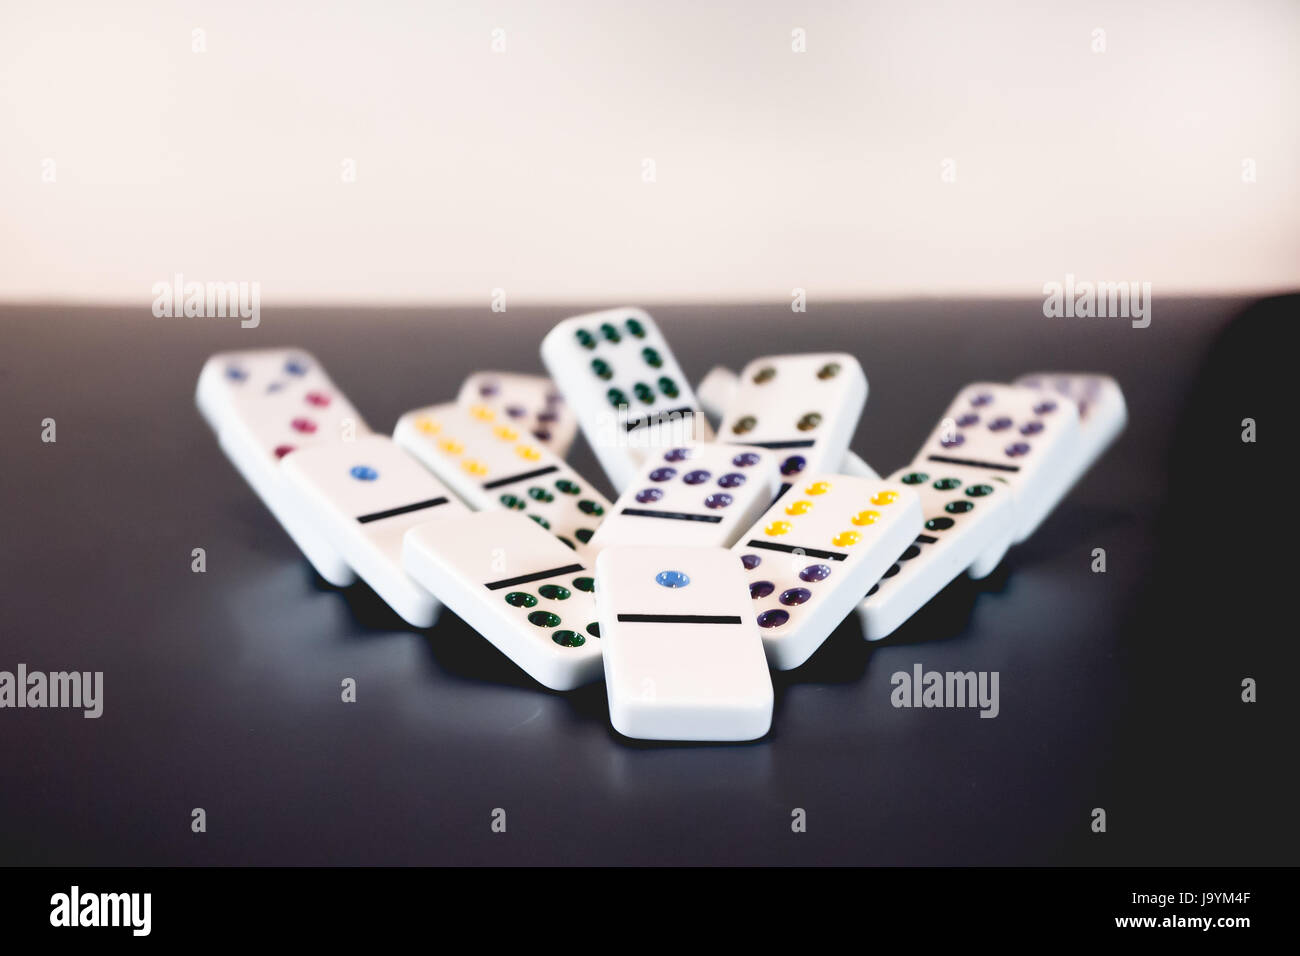 Falling dominos in motion. Stock Photo